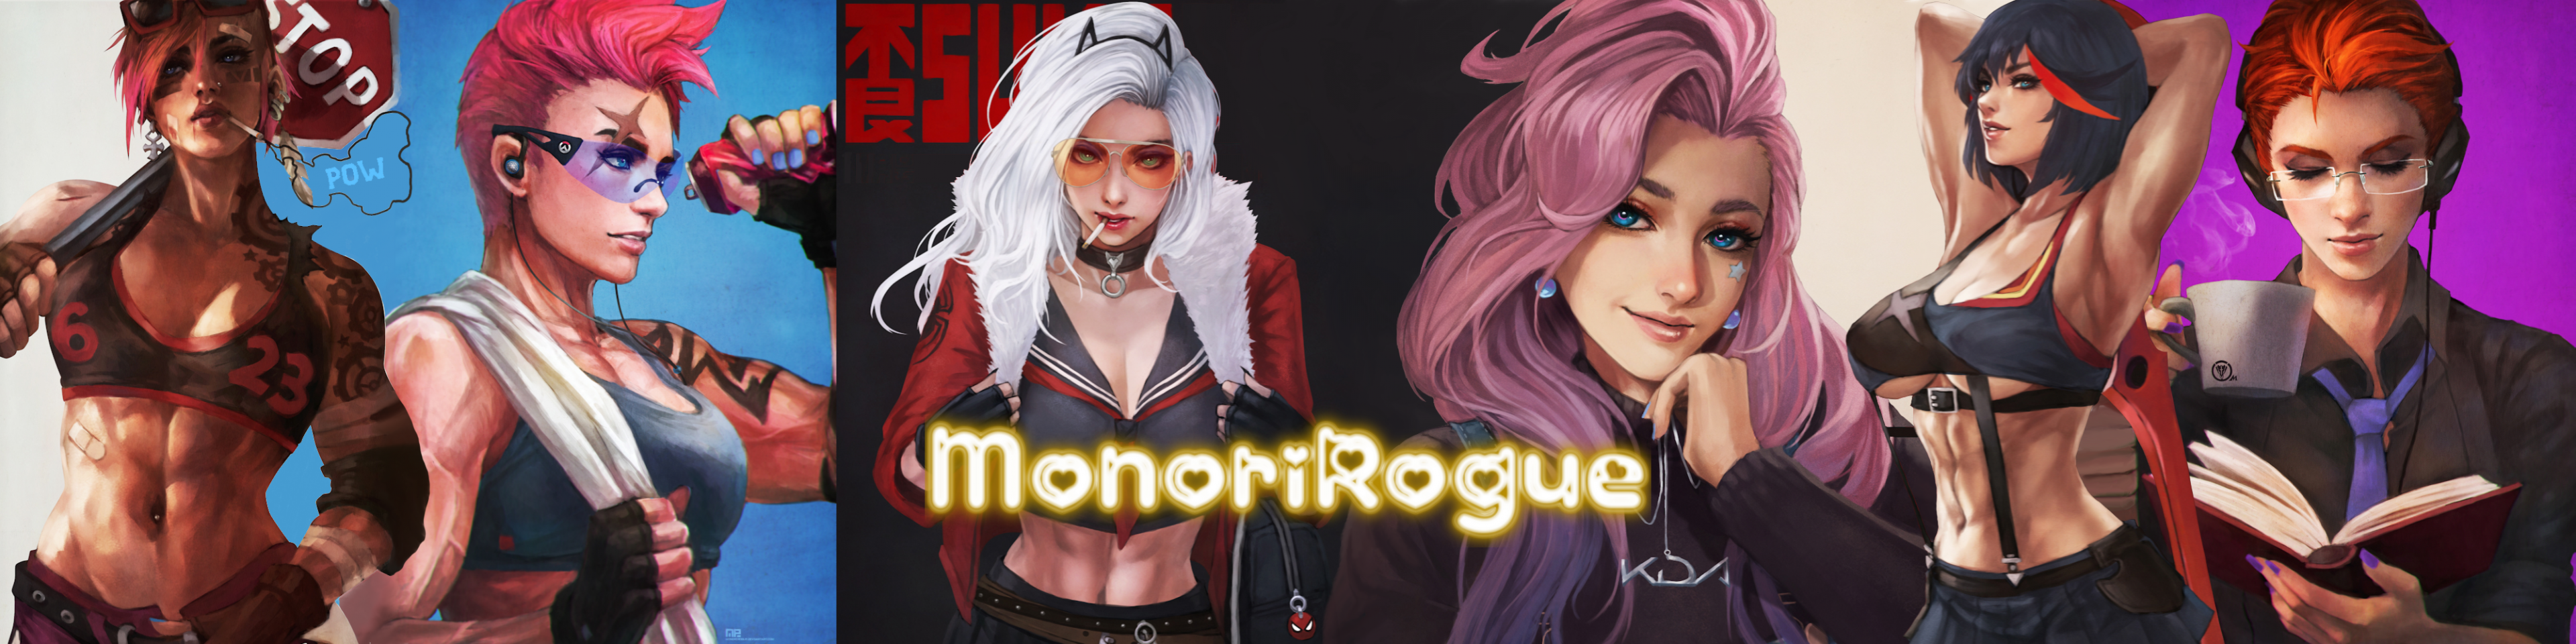 monorirogue_custom-cover_by_maleficent.png